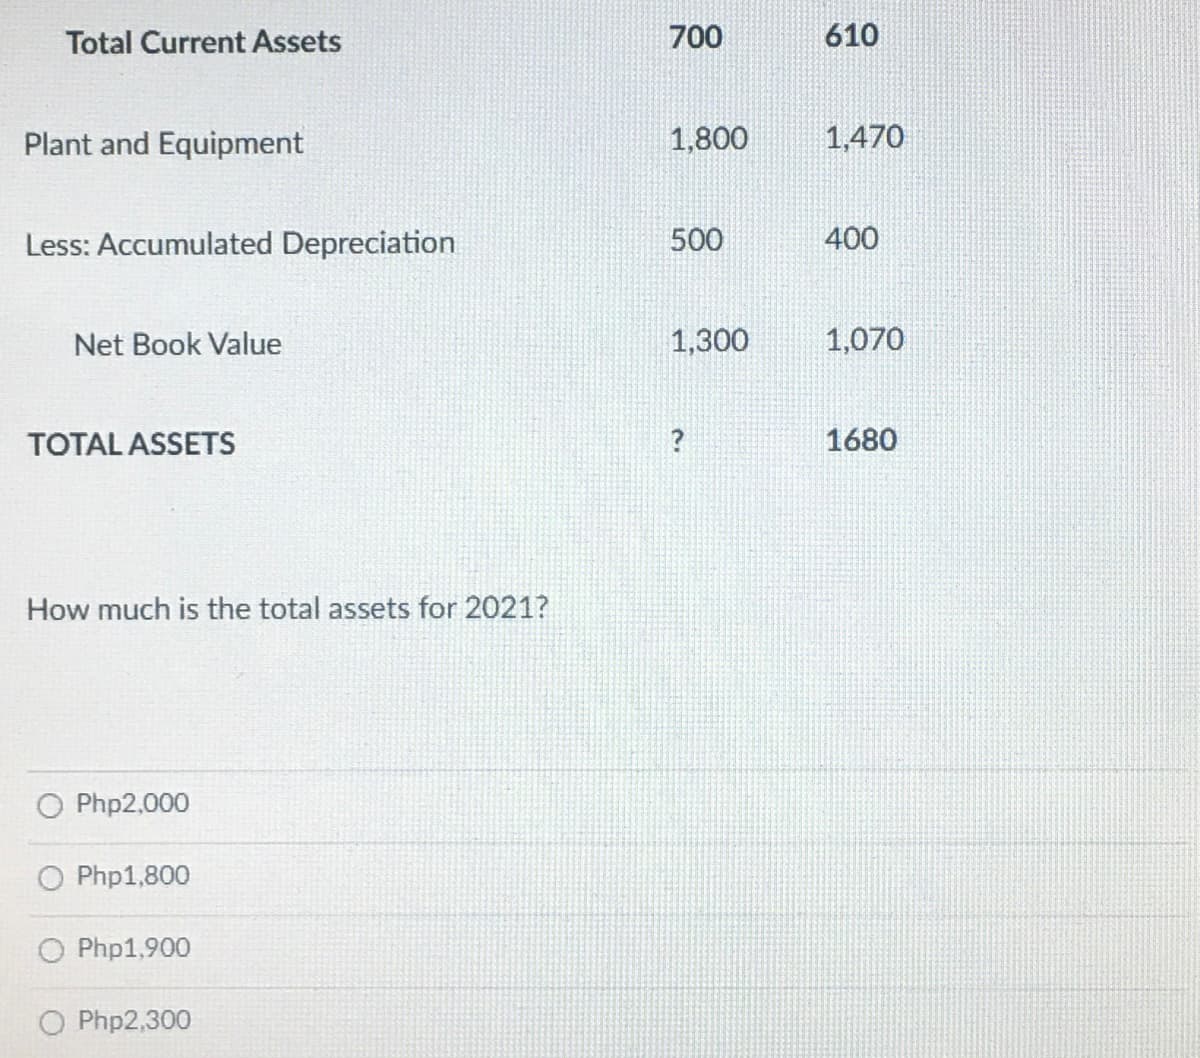 Total Current Assets
700
610
Plant and Equipment
1,800
1,470
Less: Accumulated Depreciation
500
400
Net Book Value
1,300
1,070
TOTAL ASSETS
1680
How much is the total assets for 2021?
O Php2,000
O Php1,800
O Php1,900
O Php2,300
